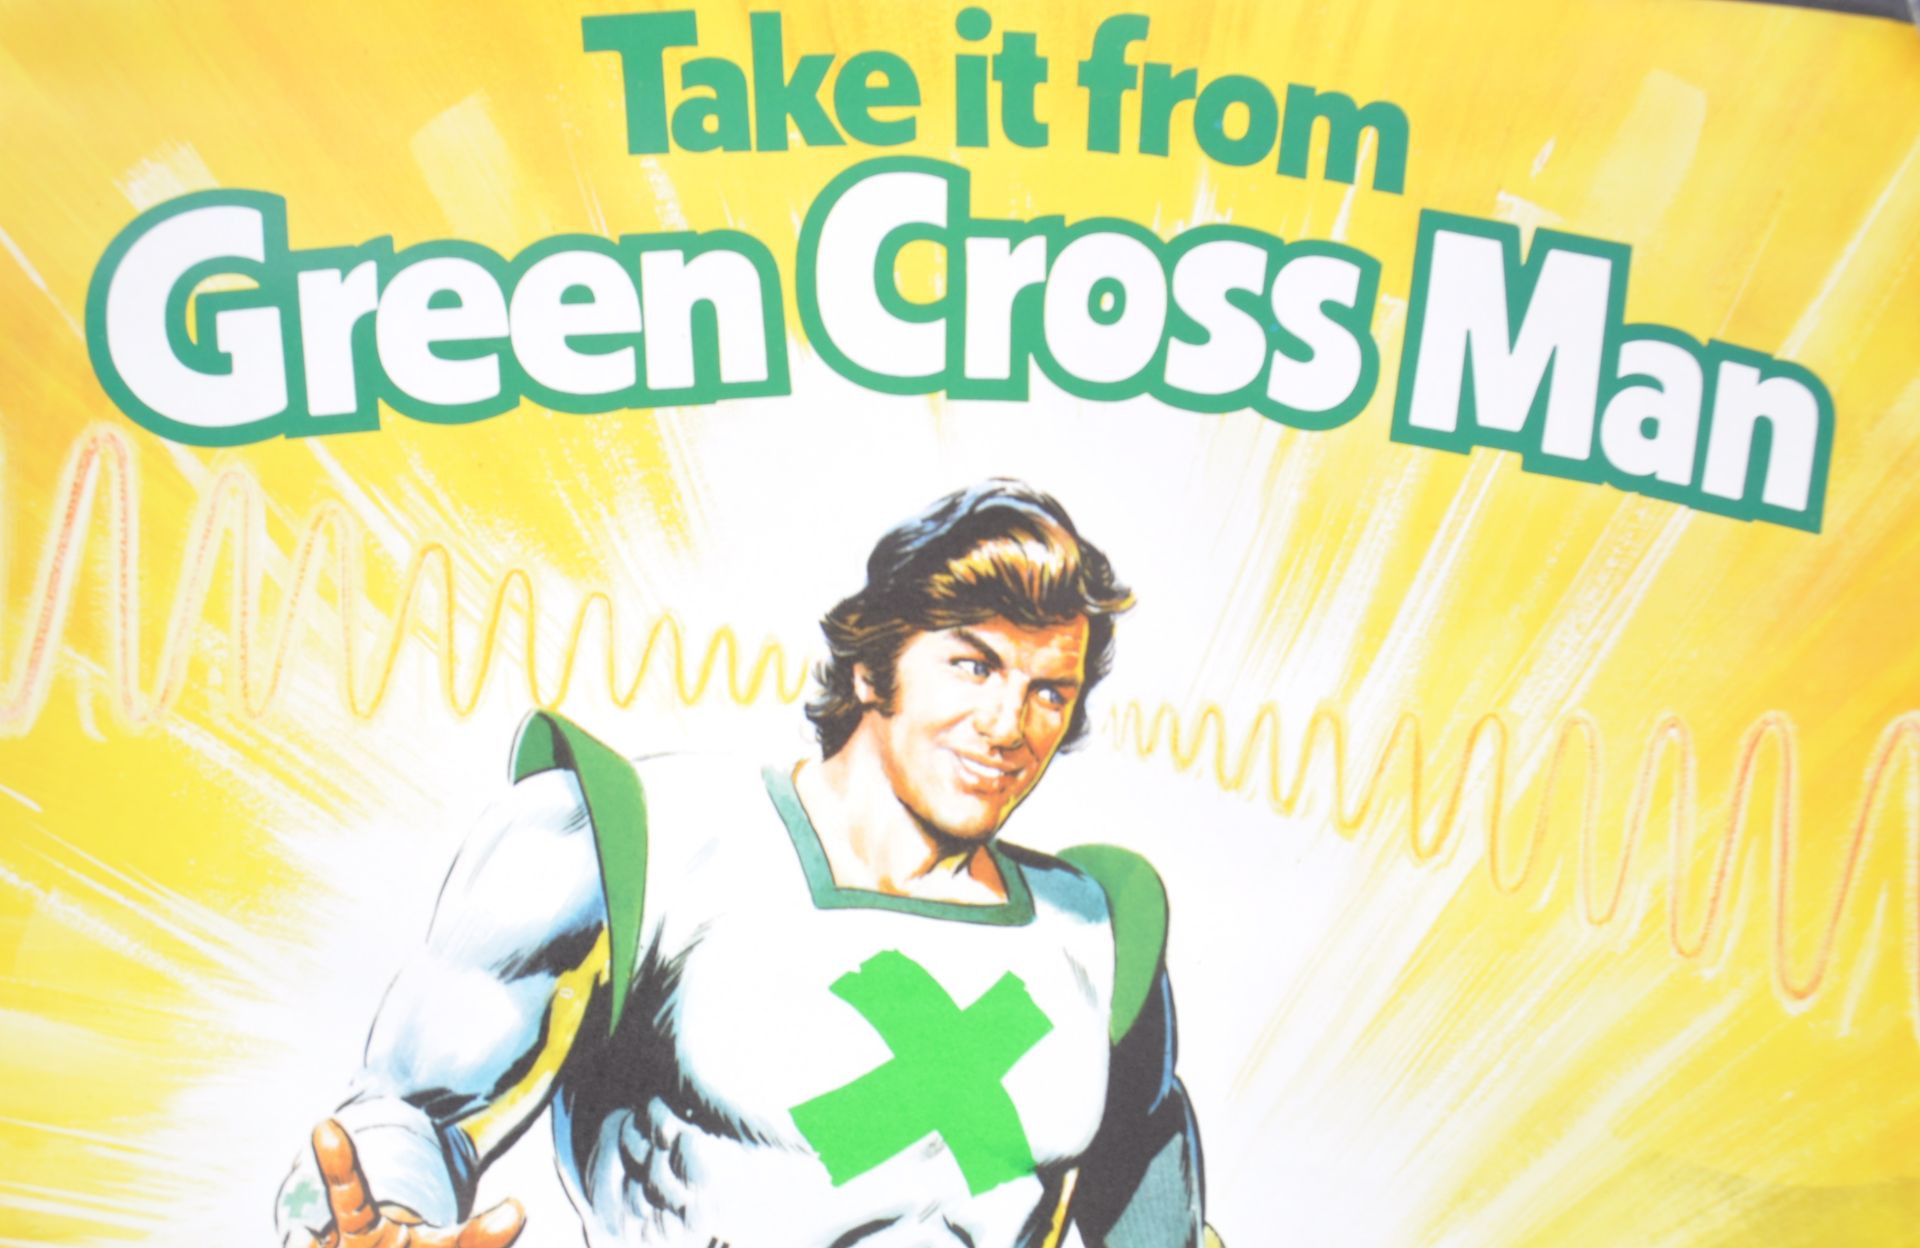 ESTATE OF DAVE PROWSE - ORIGINAL 1970S GREEN CROSS CODE MAN POSTER - Image 2 of 4